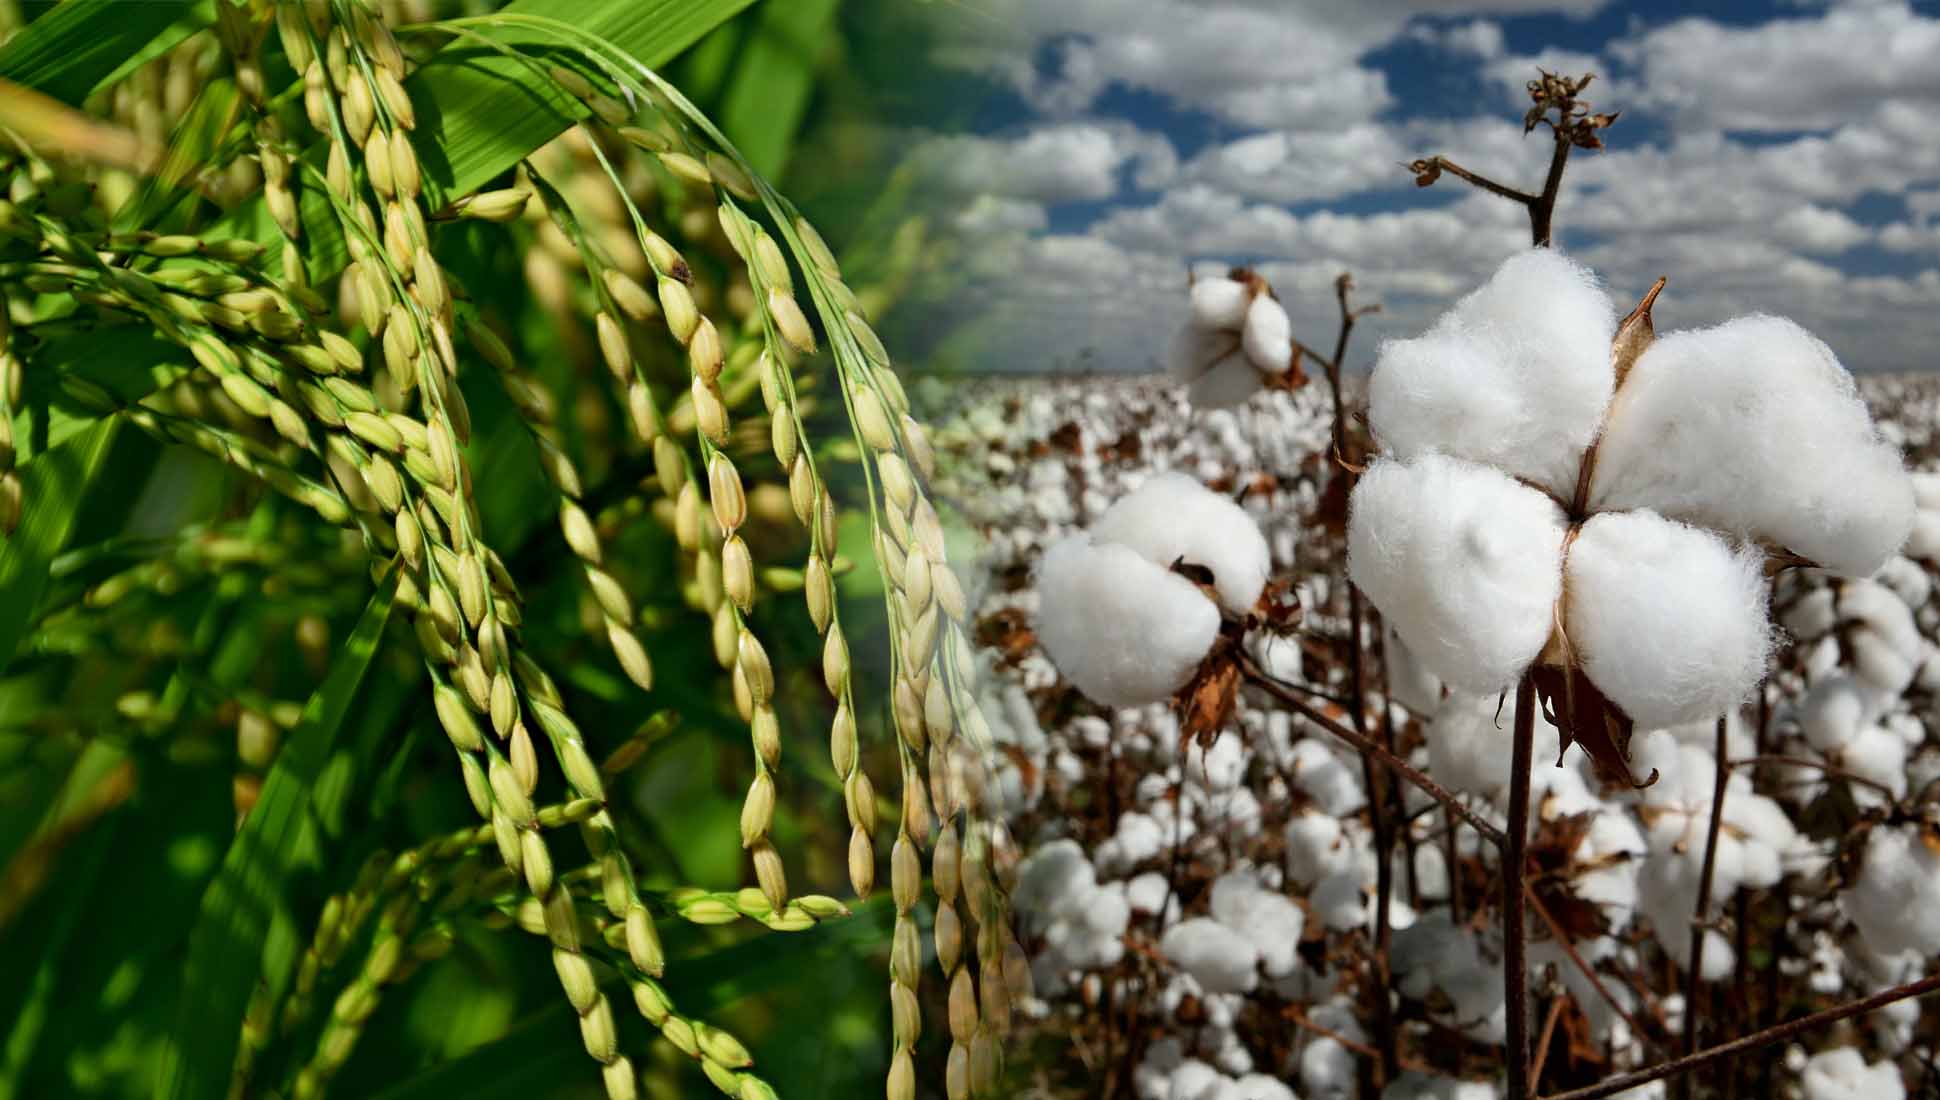 Farmers are urged to reduce rice and cotton crops